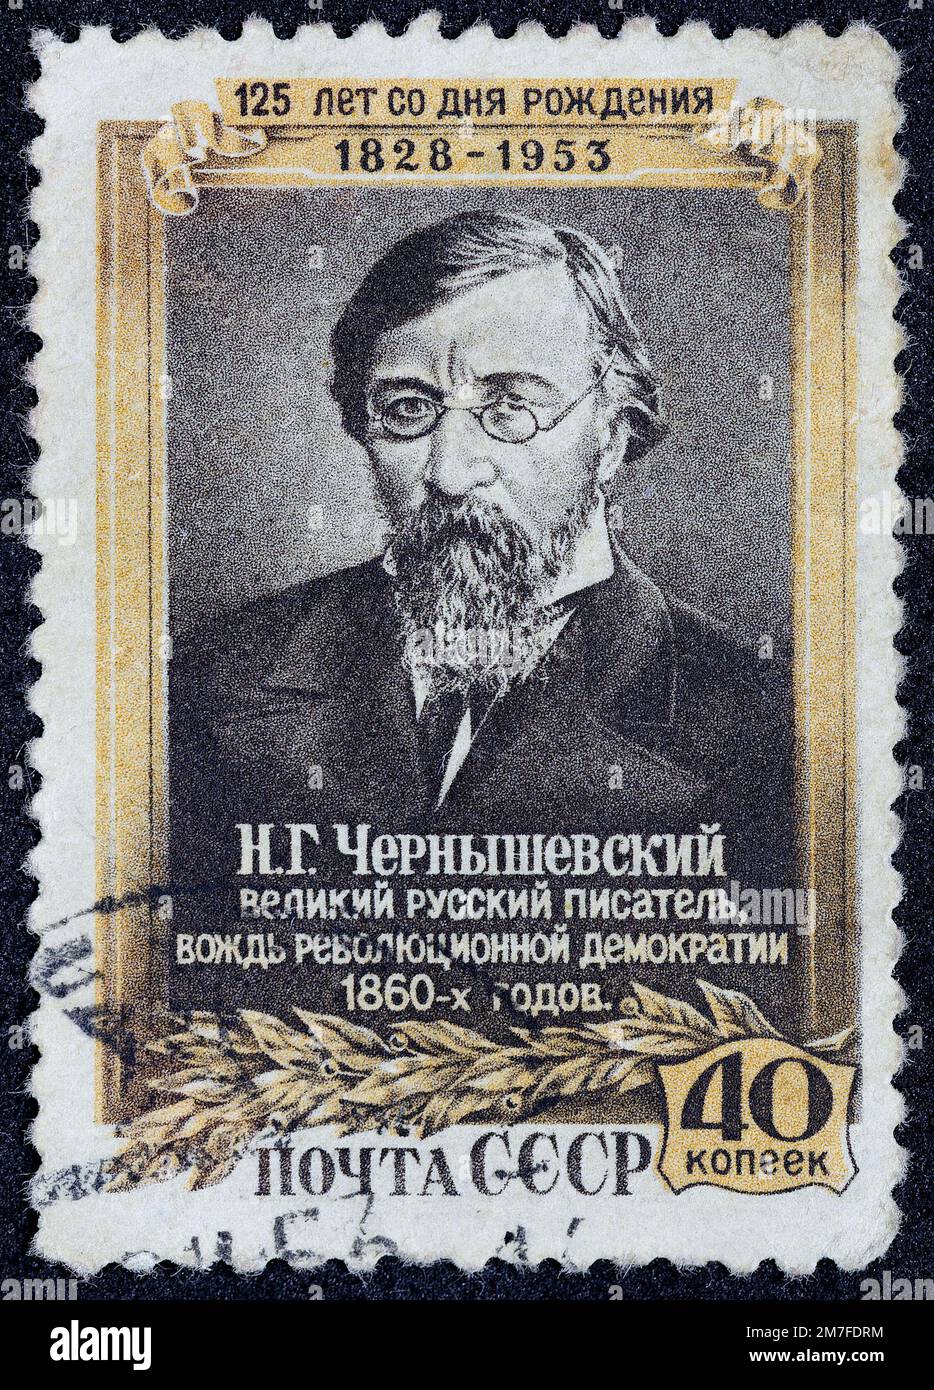 USSR - CIRCA 1953: Postage stamp 40 kopeck printed in the Soviet Union shows Portrait of critic Nikolai Chernyshevsky. Post stamp series devoted to 12 Stock Photo